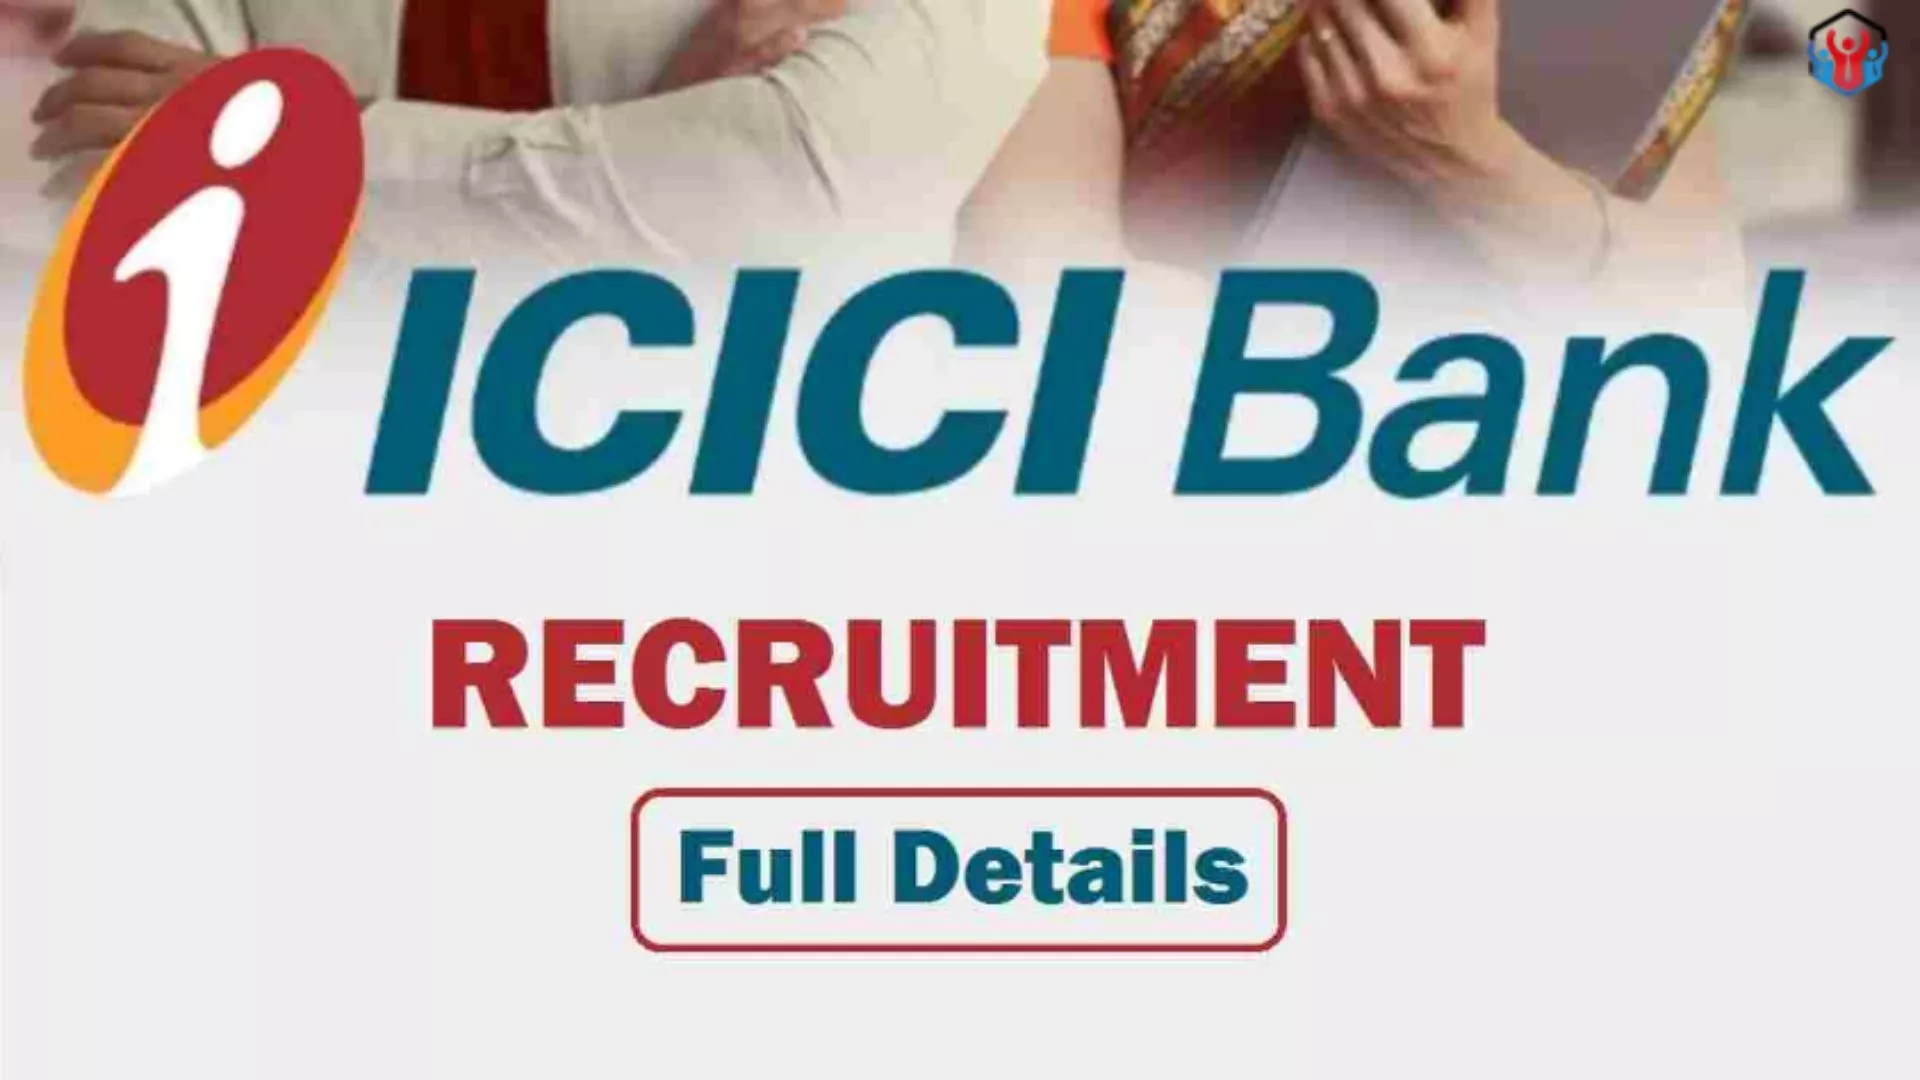 ICICI Bank Vacancy Released for Customer Account Manager post, Graduates can apply online